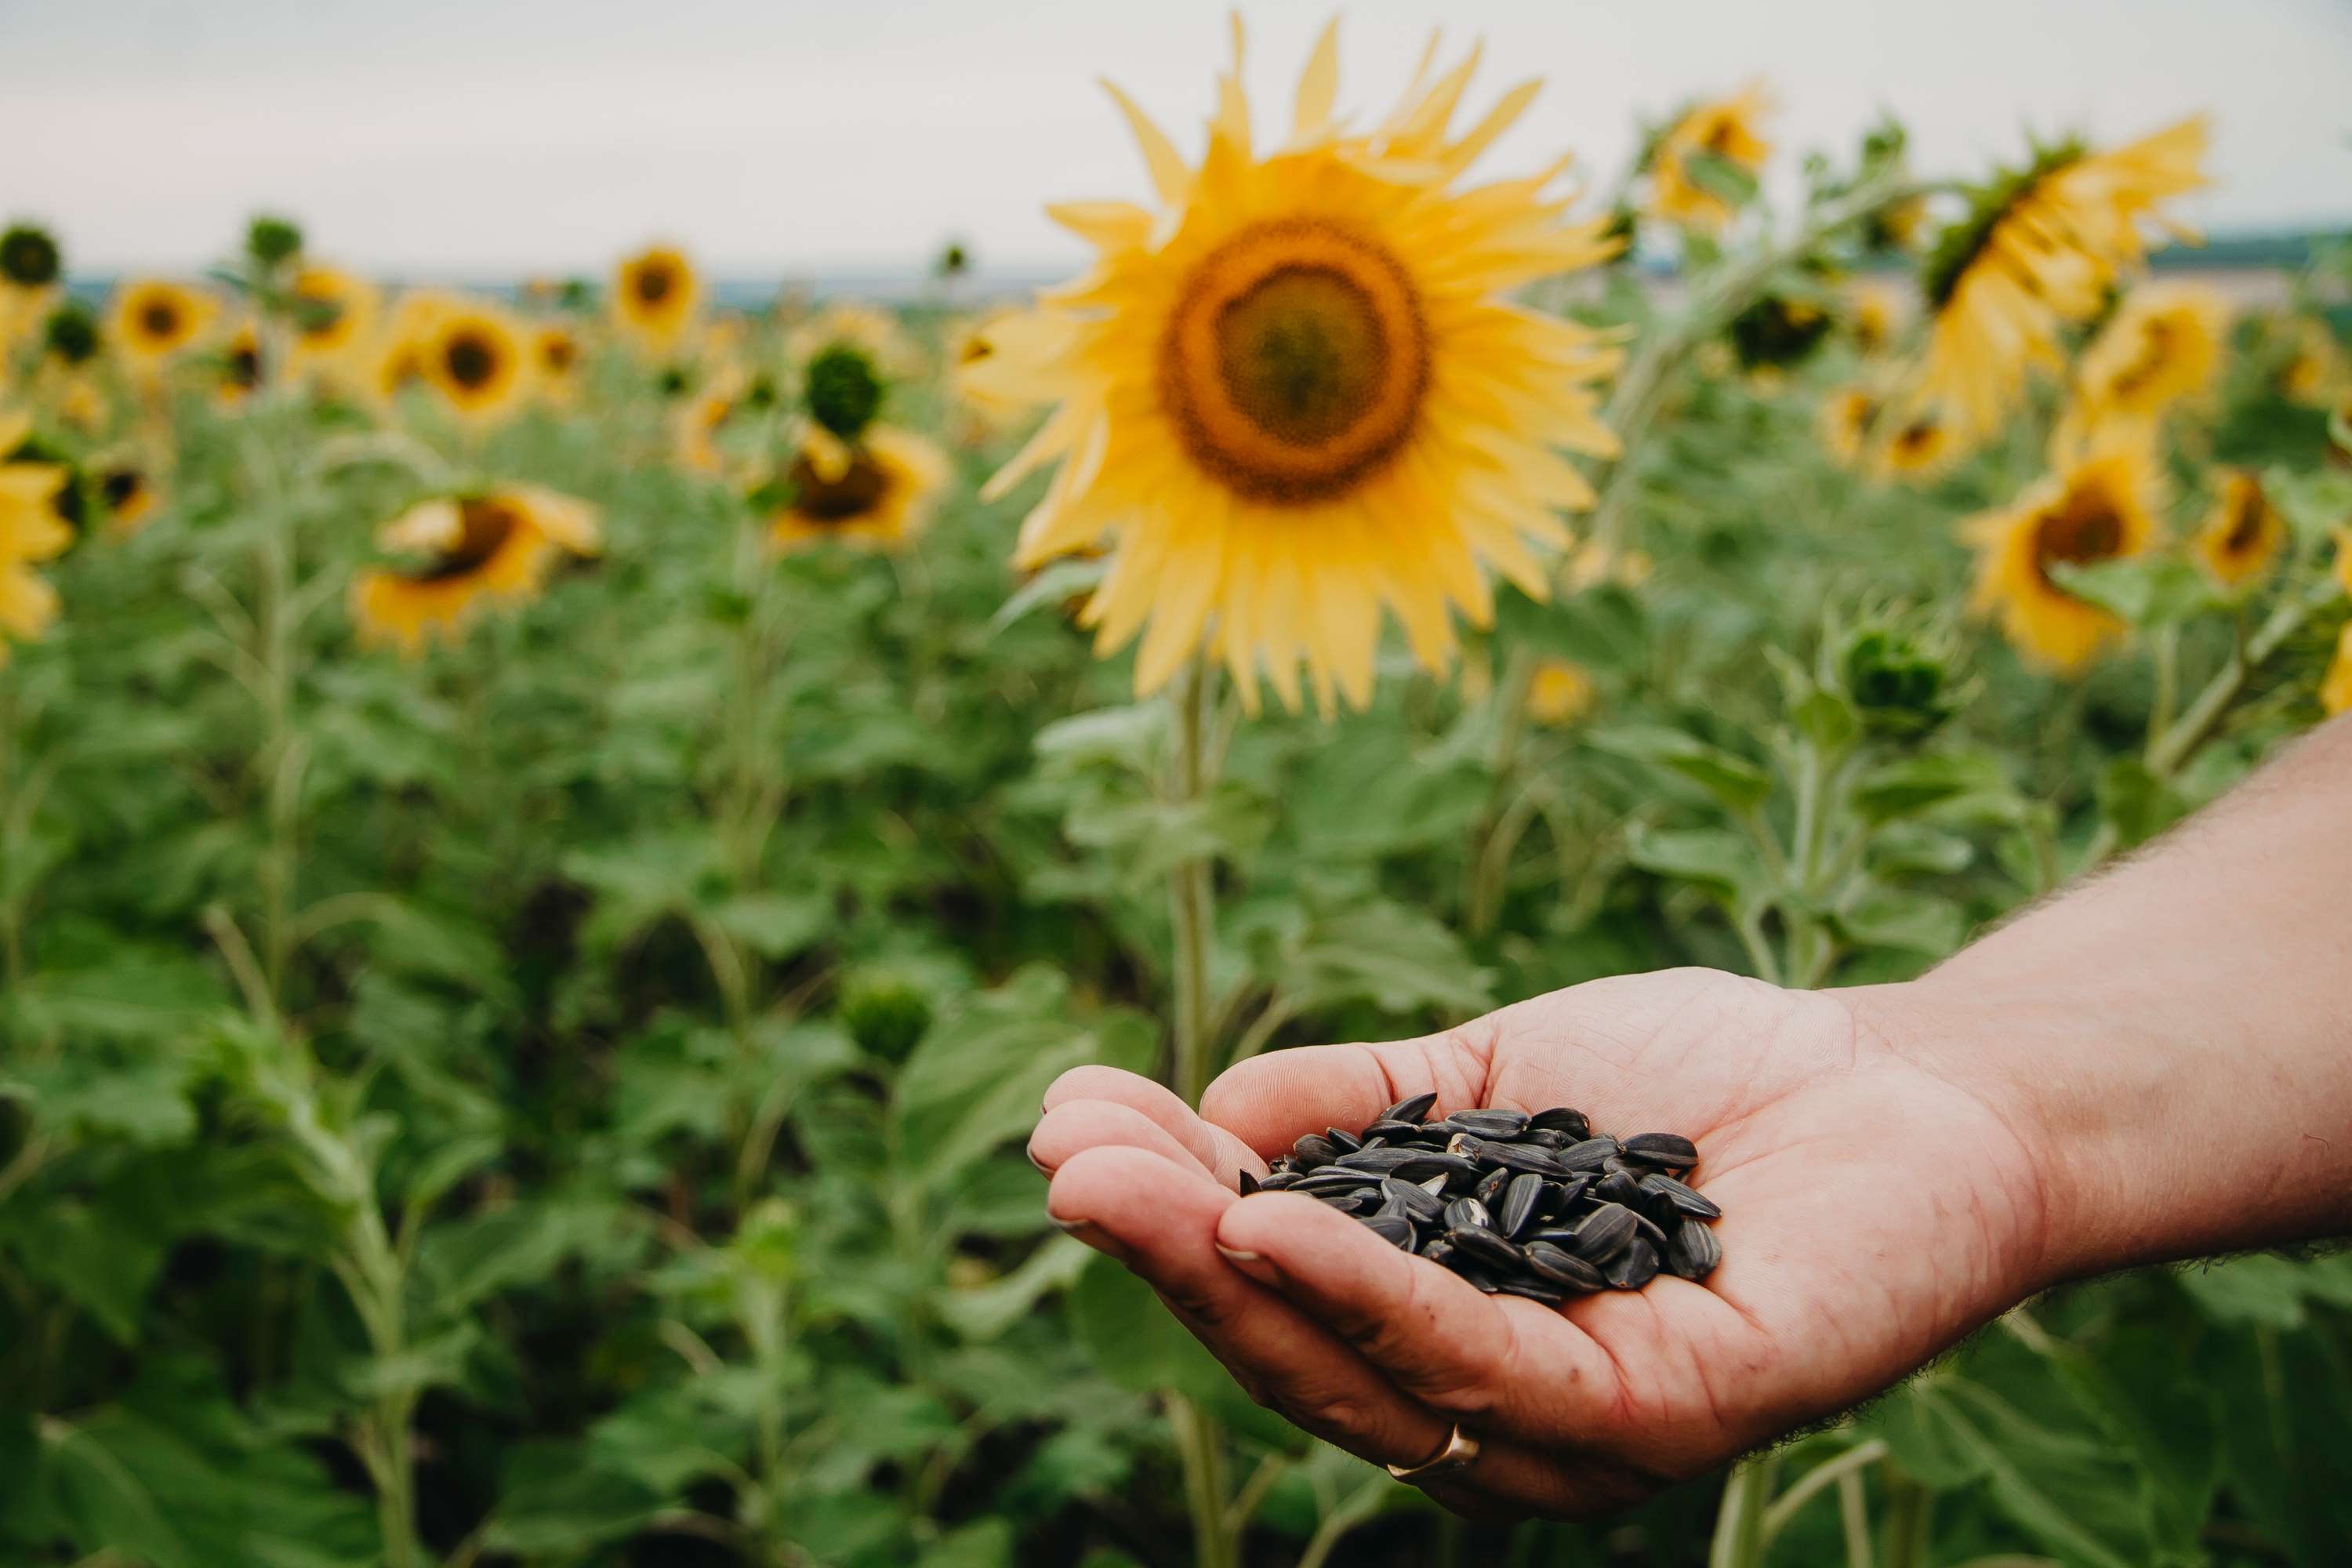 How To Soak Sunflower Seeds Before Planting